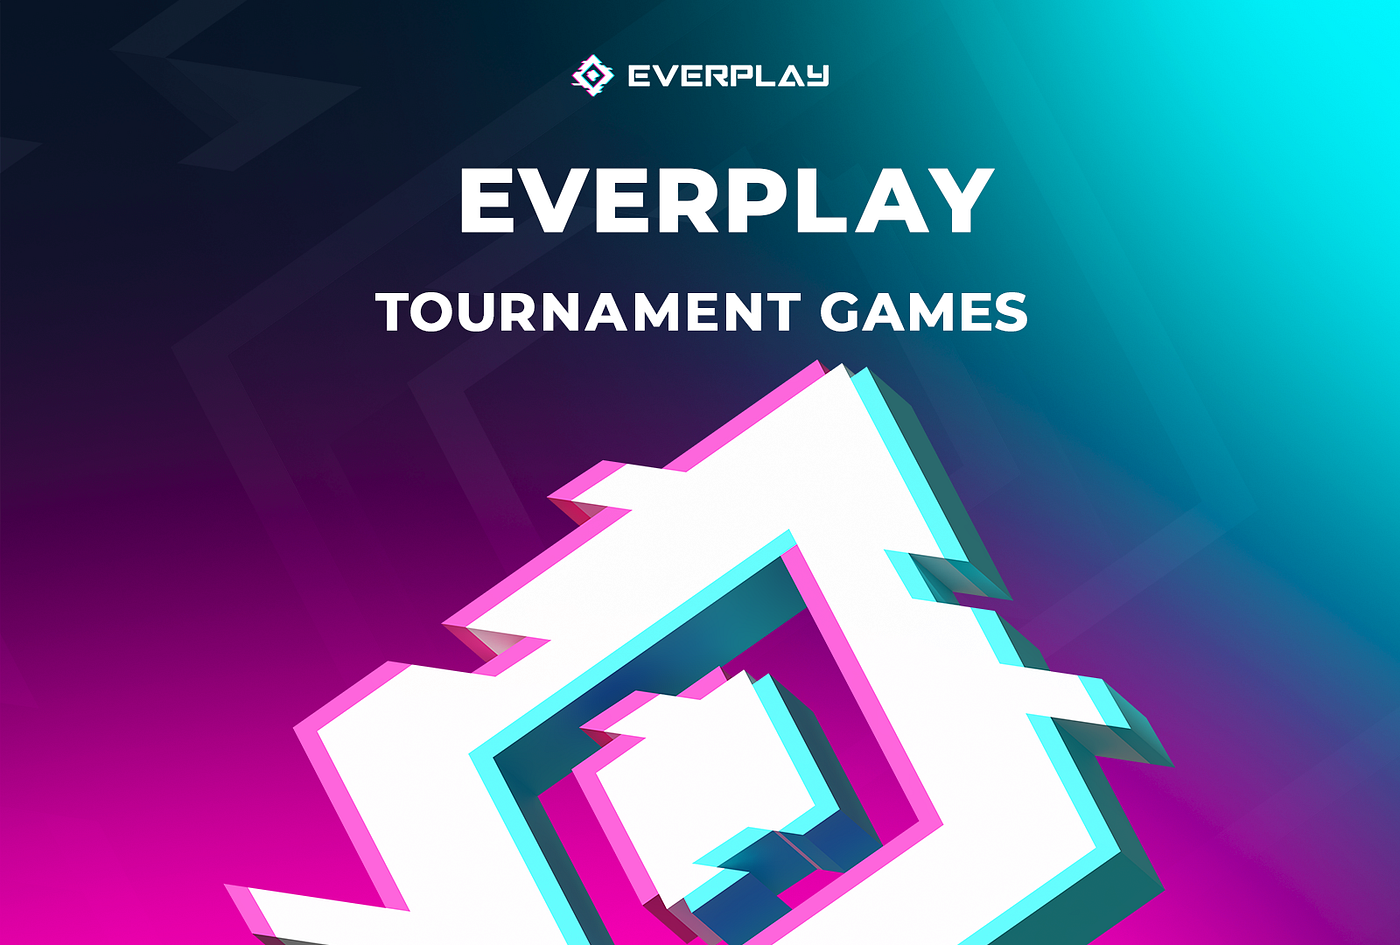 EVERPLAY tournament games